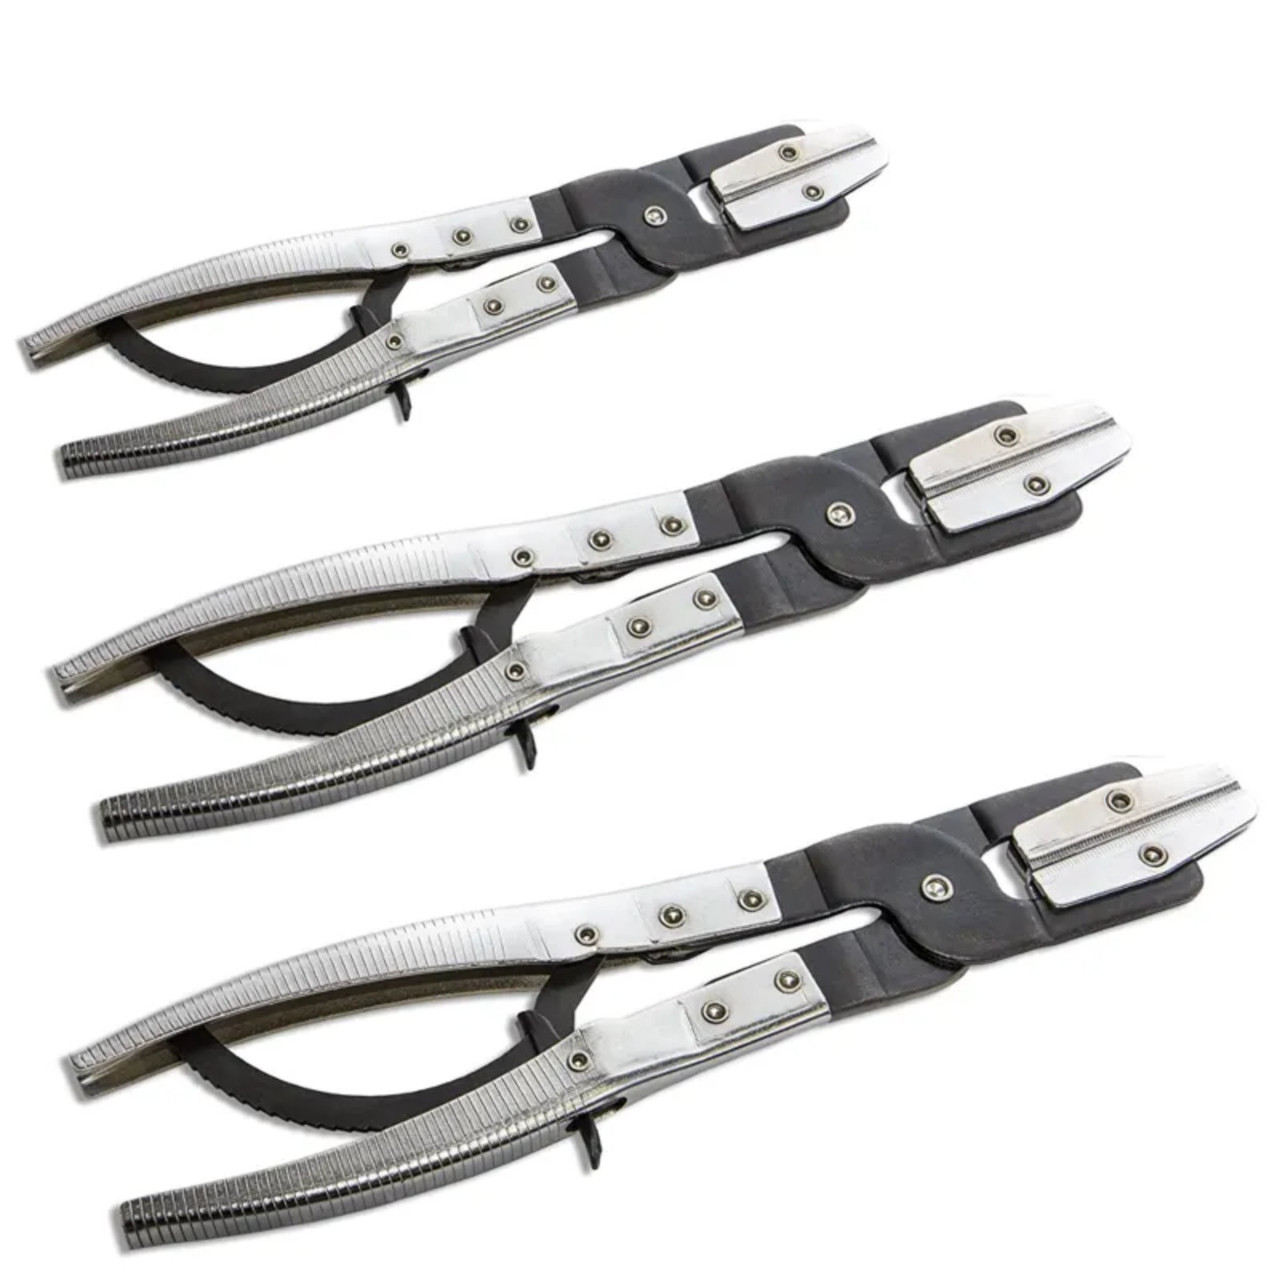 3pc Pinch-Off Radiator, Coolant, Heater, Fuel Line Pinch-Off Pliers Set